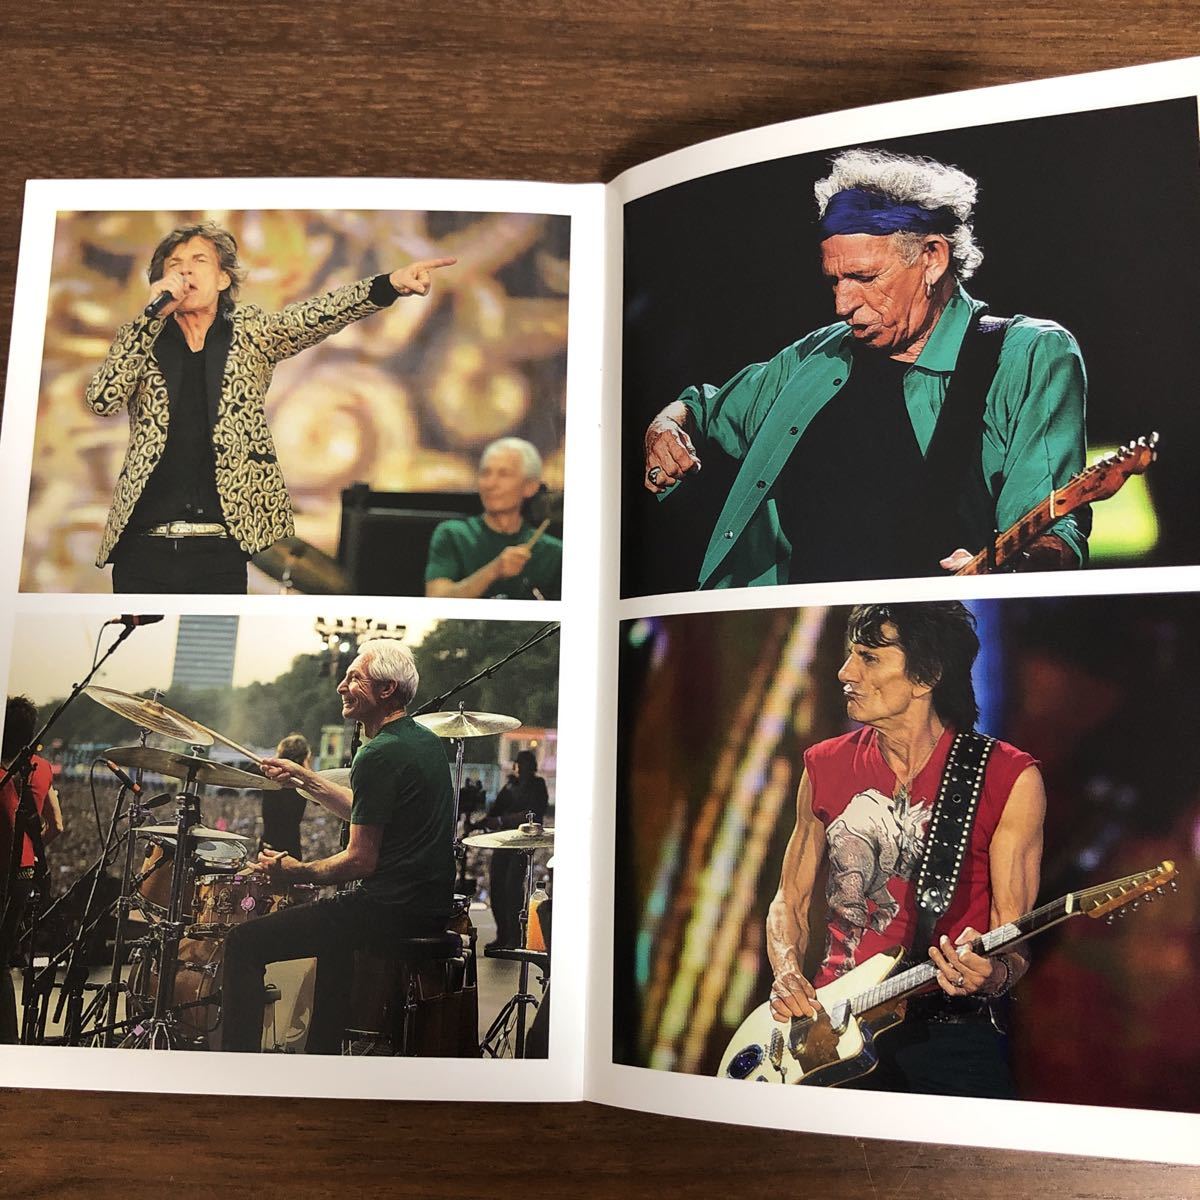 [Blu-ray]* Suite * summer * sun Stone z* live * in * London * hyde * park 2013 THE ROLLING STONES SWEET SUMMER SUN